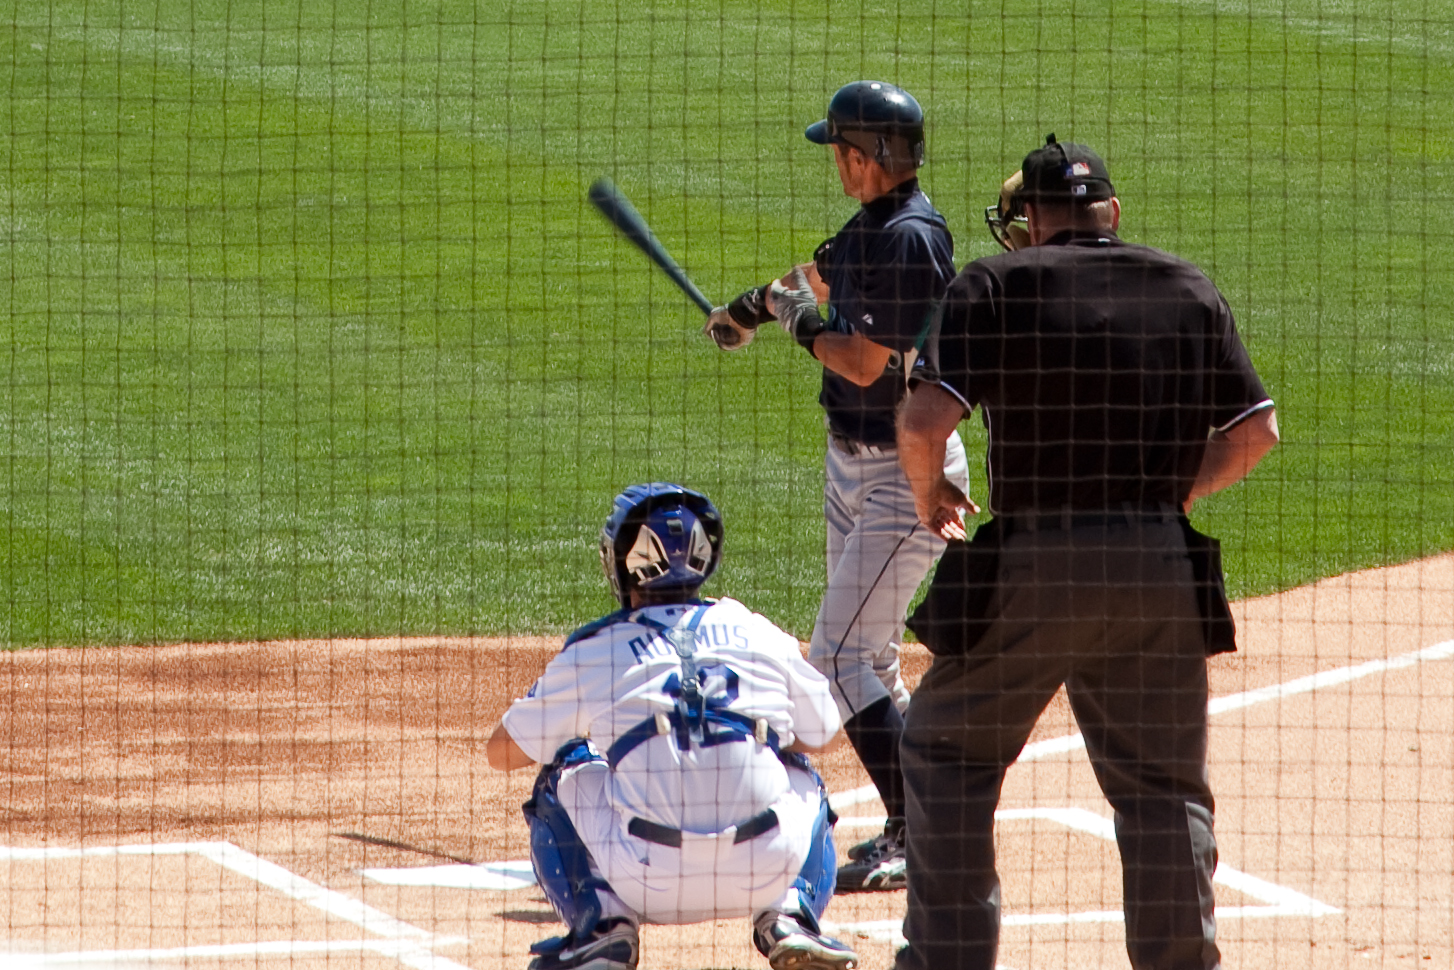 a batter at home plate holding his bat